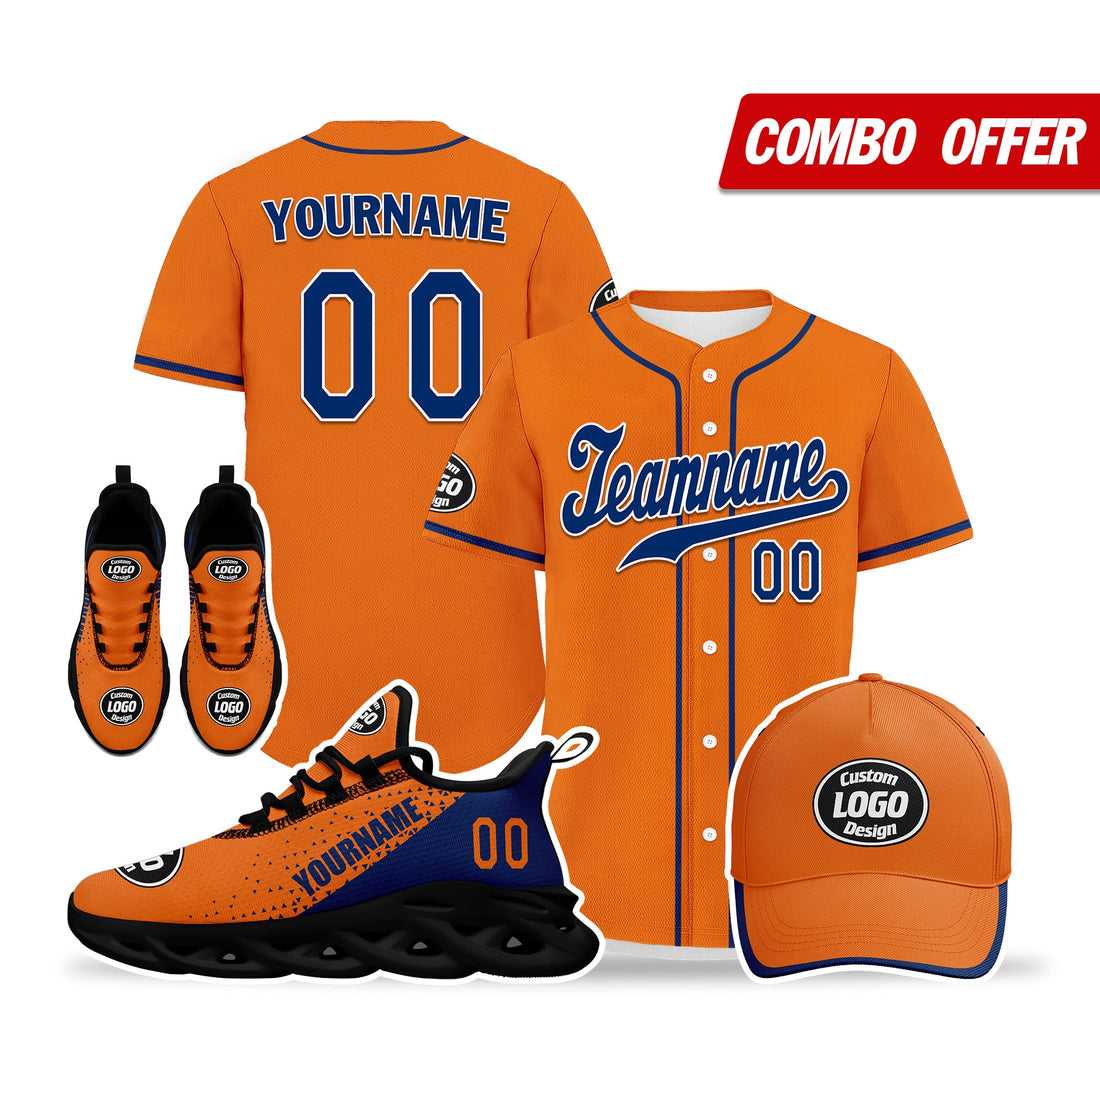 Custom Orange Blue Jersey MaxSoul Shoes and Hat Combo Offer Personalized ZH-D0b0090-b